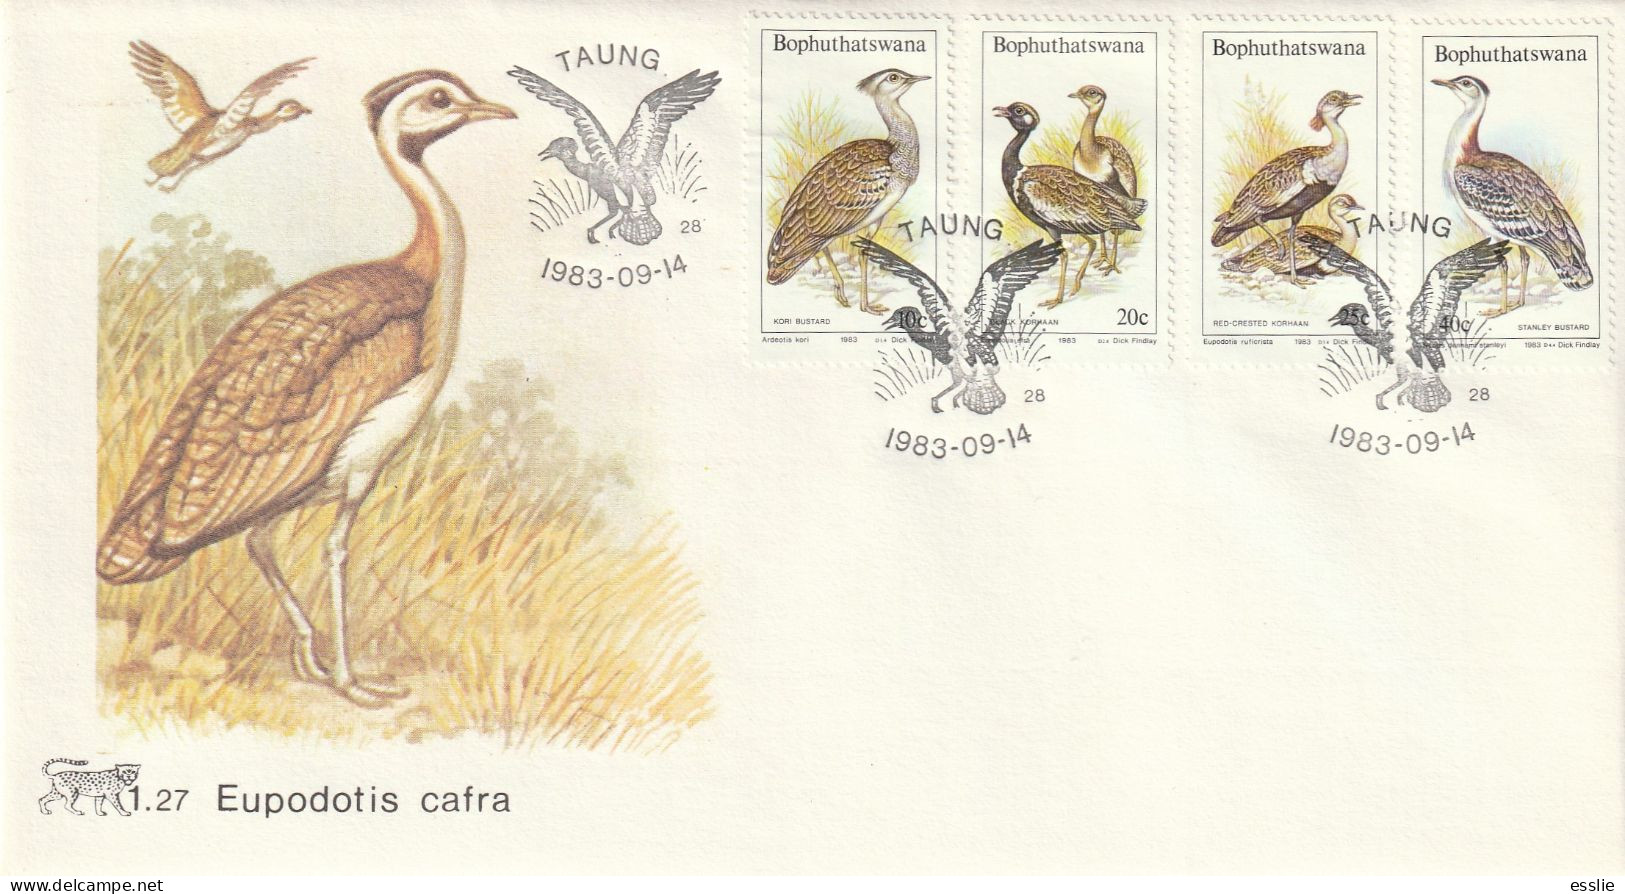 Bophuthatswana - 1983 - Birds Vogel Of The Veld Bustards - First Day Cover - Small - Gru & Uccelli Trampolieri